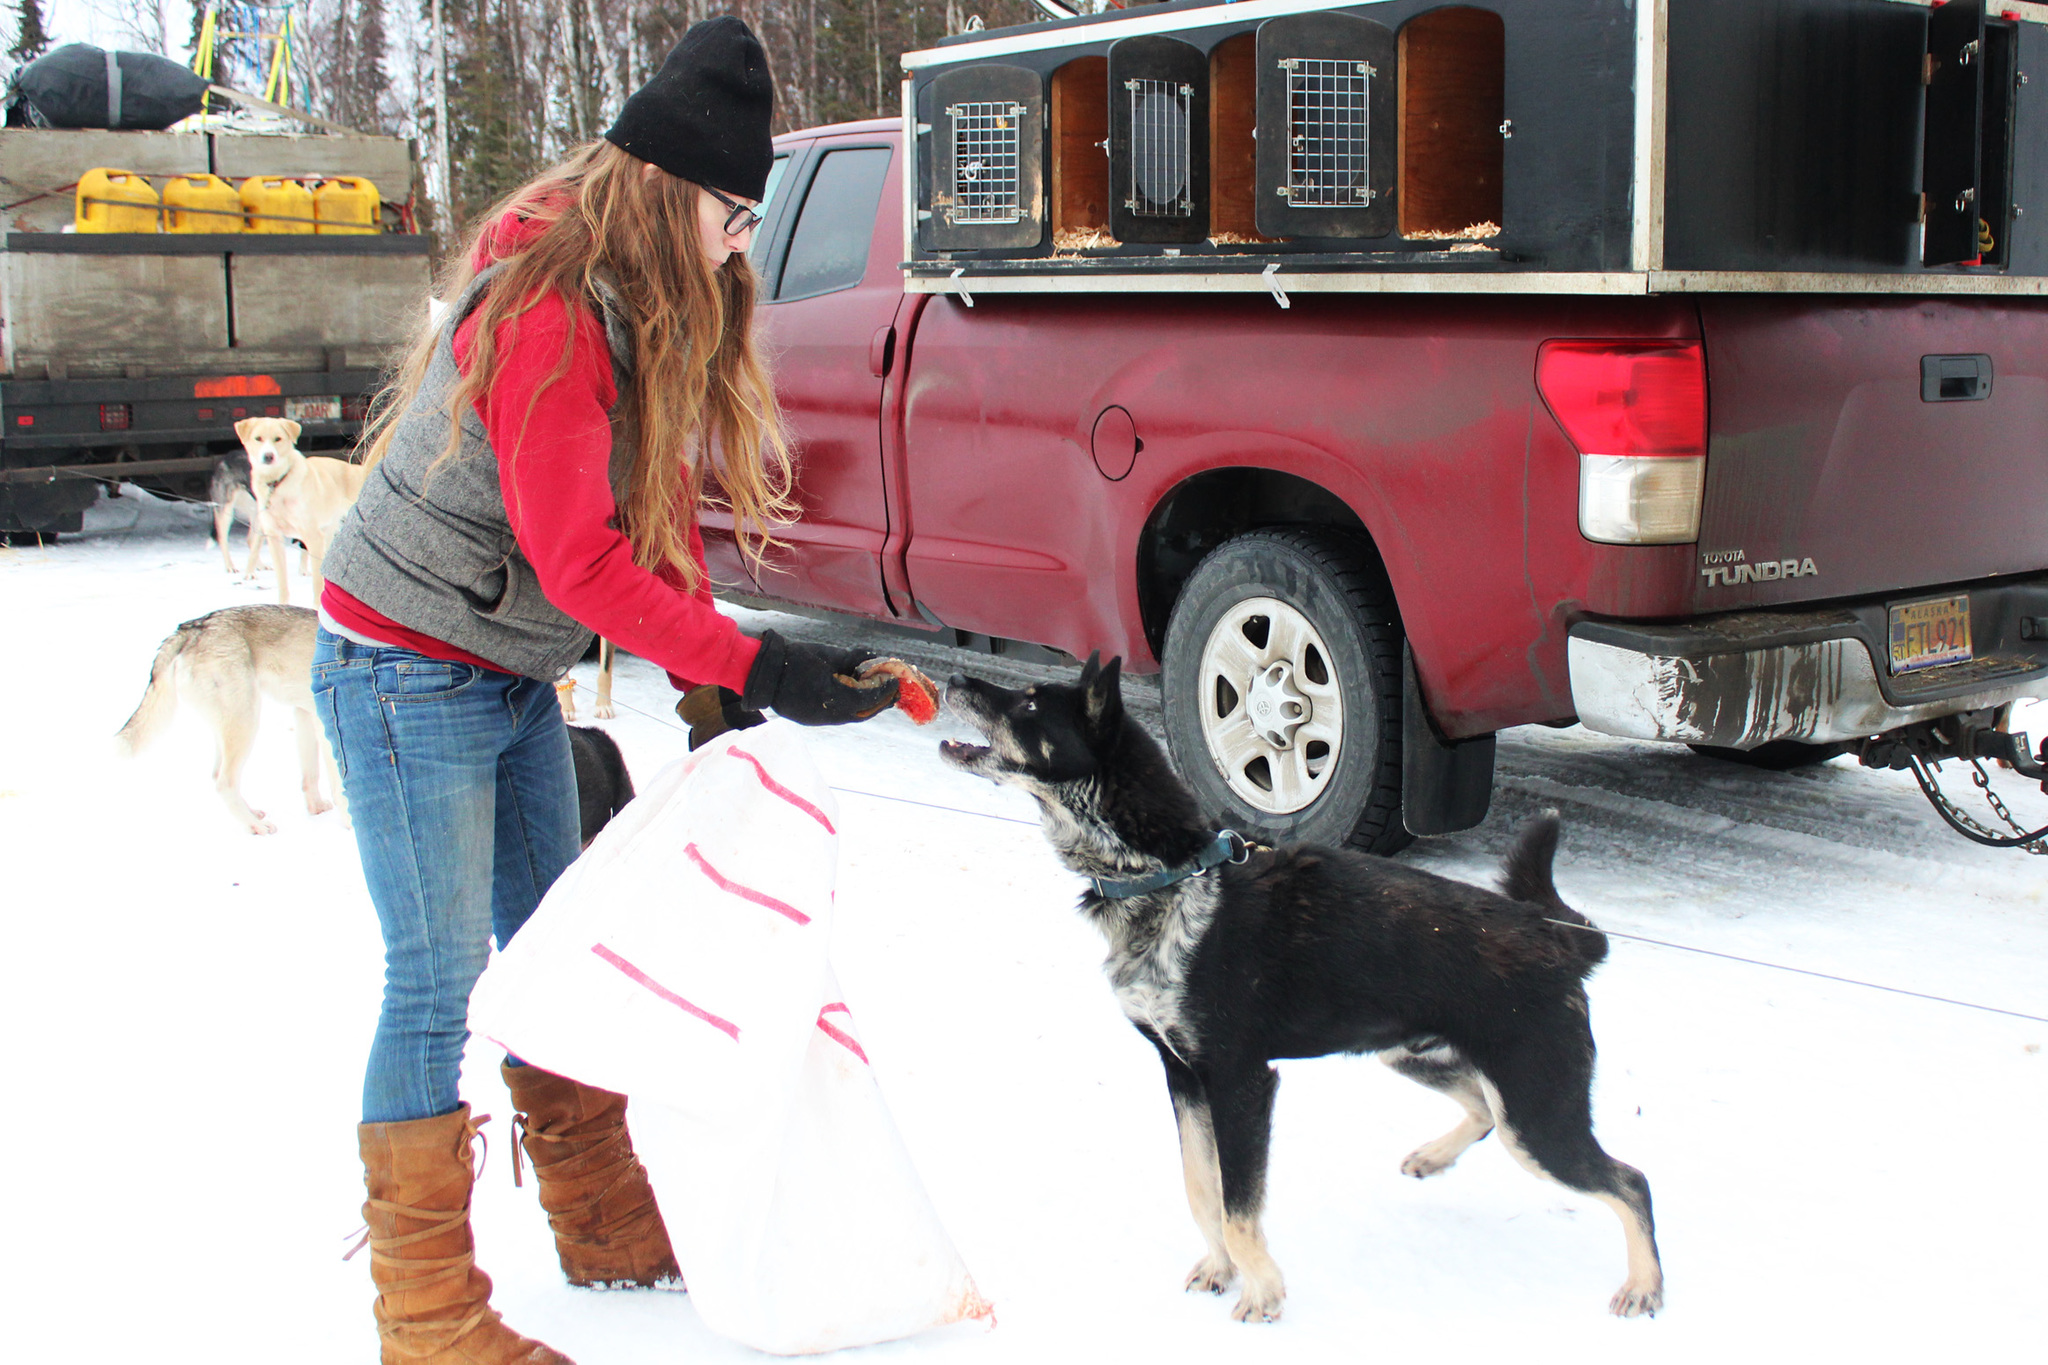 Handler Tara Cicatello feeds a piece of salmon to a sled dog named Monk during veterinary checks Friday, Jan. 27, 2017 outside the Soldotna Regional Sports Complex. Mushers, handlers and vets converged on Soldotna Friday ahead of the weekend's Tustumena 200 Sled Dog Race. The race is celebrating 30 years after having been canceled several times due to lack of snow. (Megan Pacer/Peninsula Clarion)